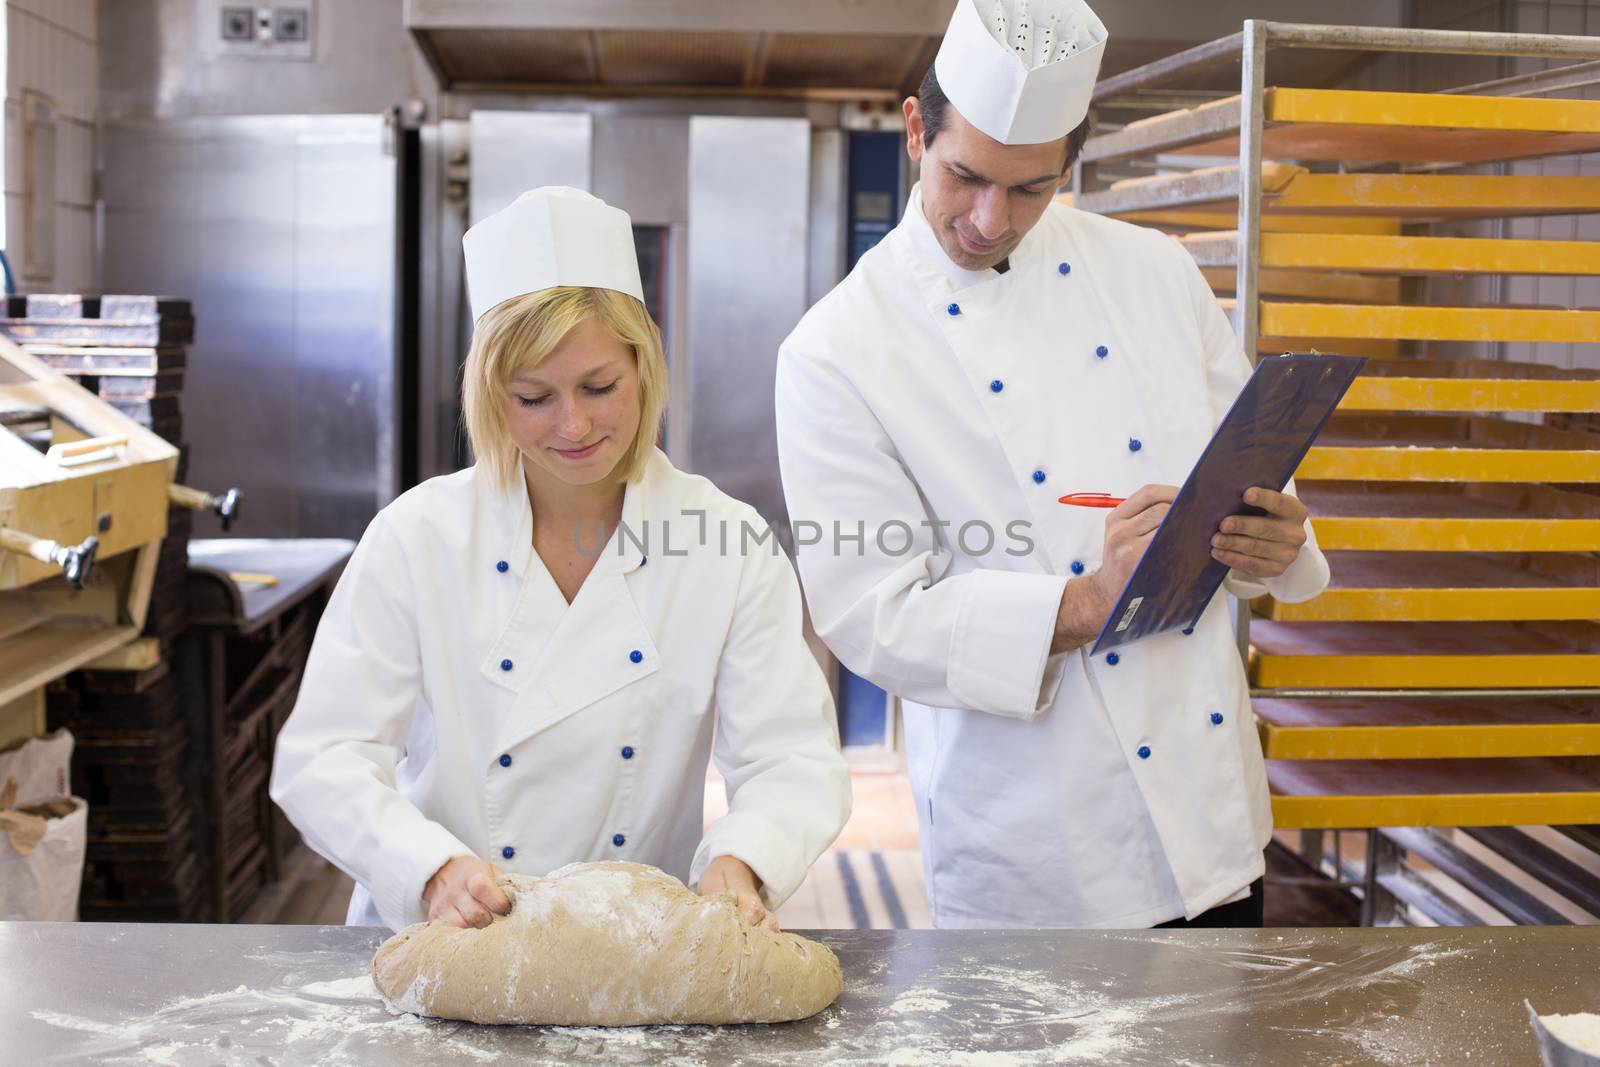 Instructor watching an apprentice kneading dough